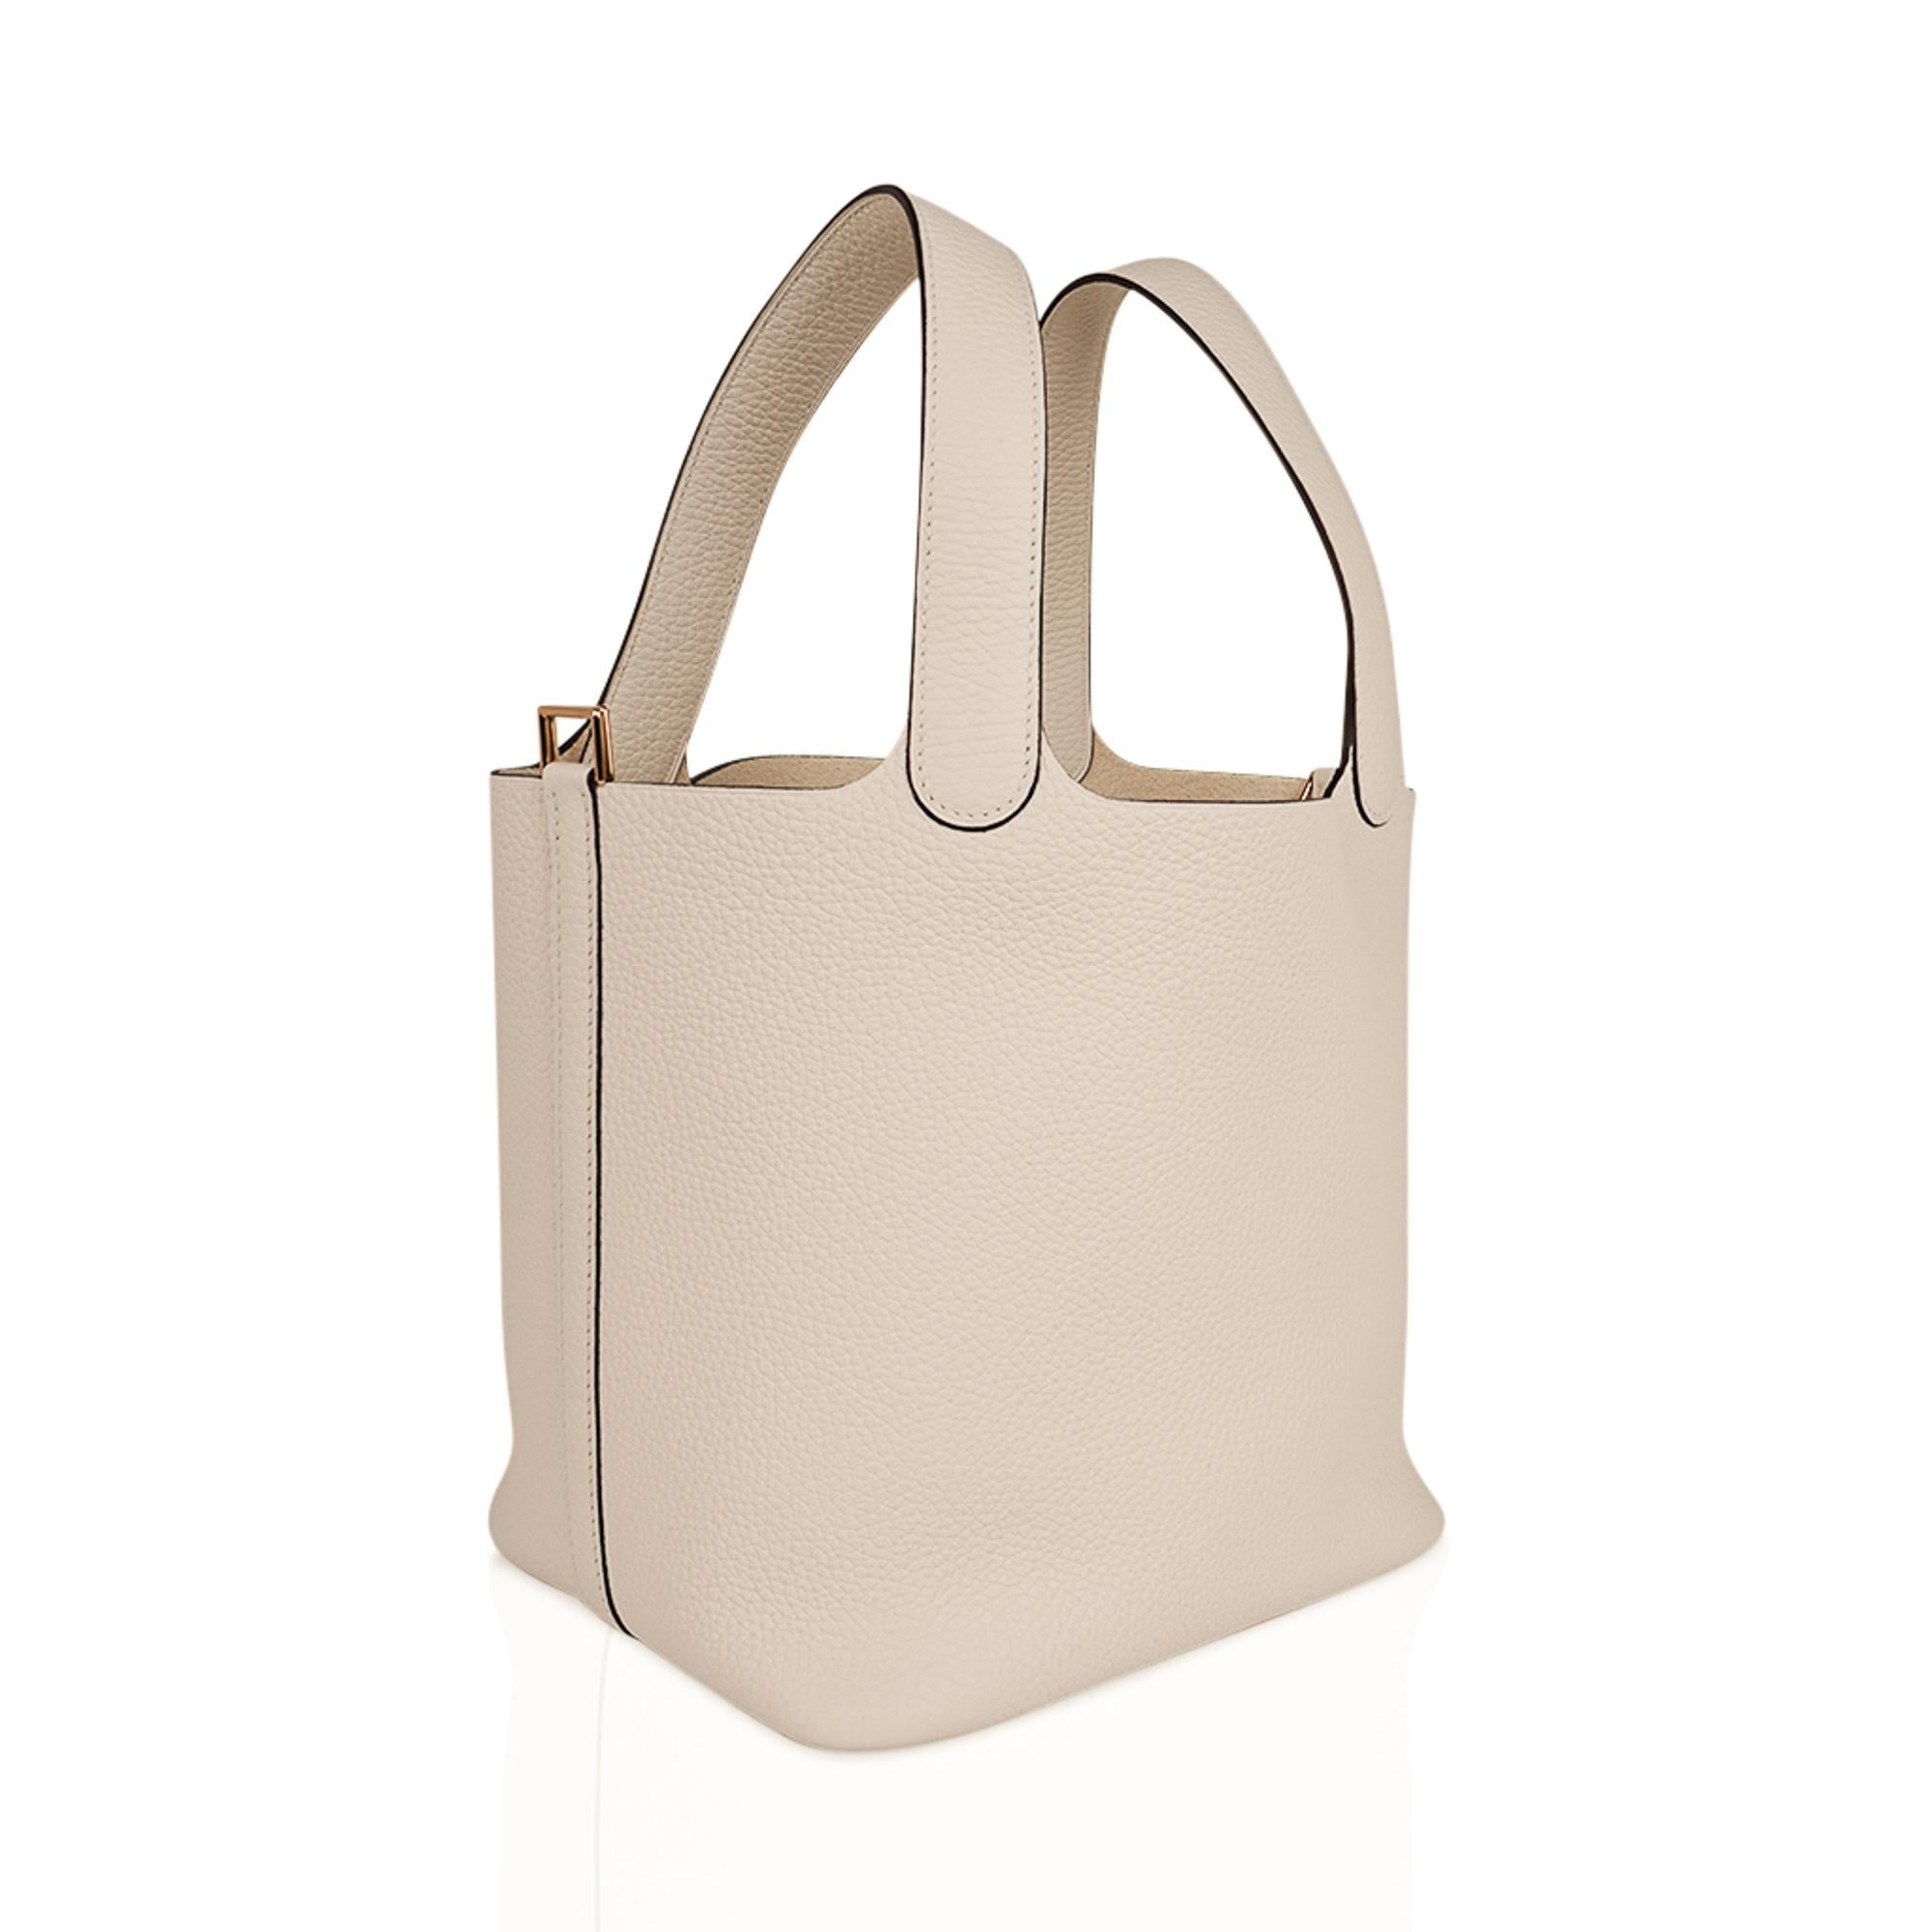 Mightychic offers an Hermes Picotin Lock 22 bag featured in fabulous chalk white neutral Nata.
Rich with gold hardware.
This roomy tote is a perfect go to bag!
Comes with Signature Hermes box, lock, keys and sleeper.
NEW or NEVER WORN
final